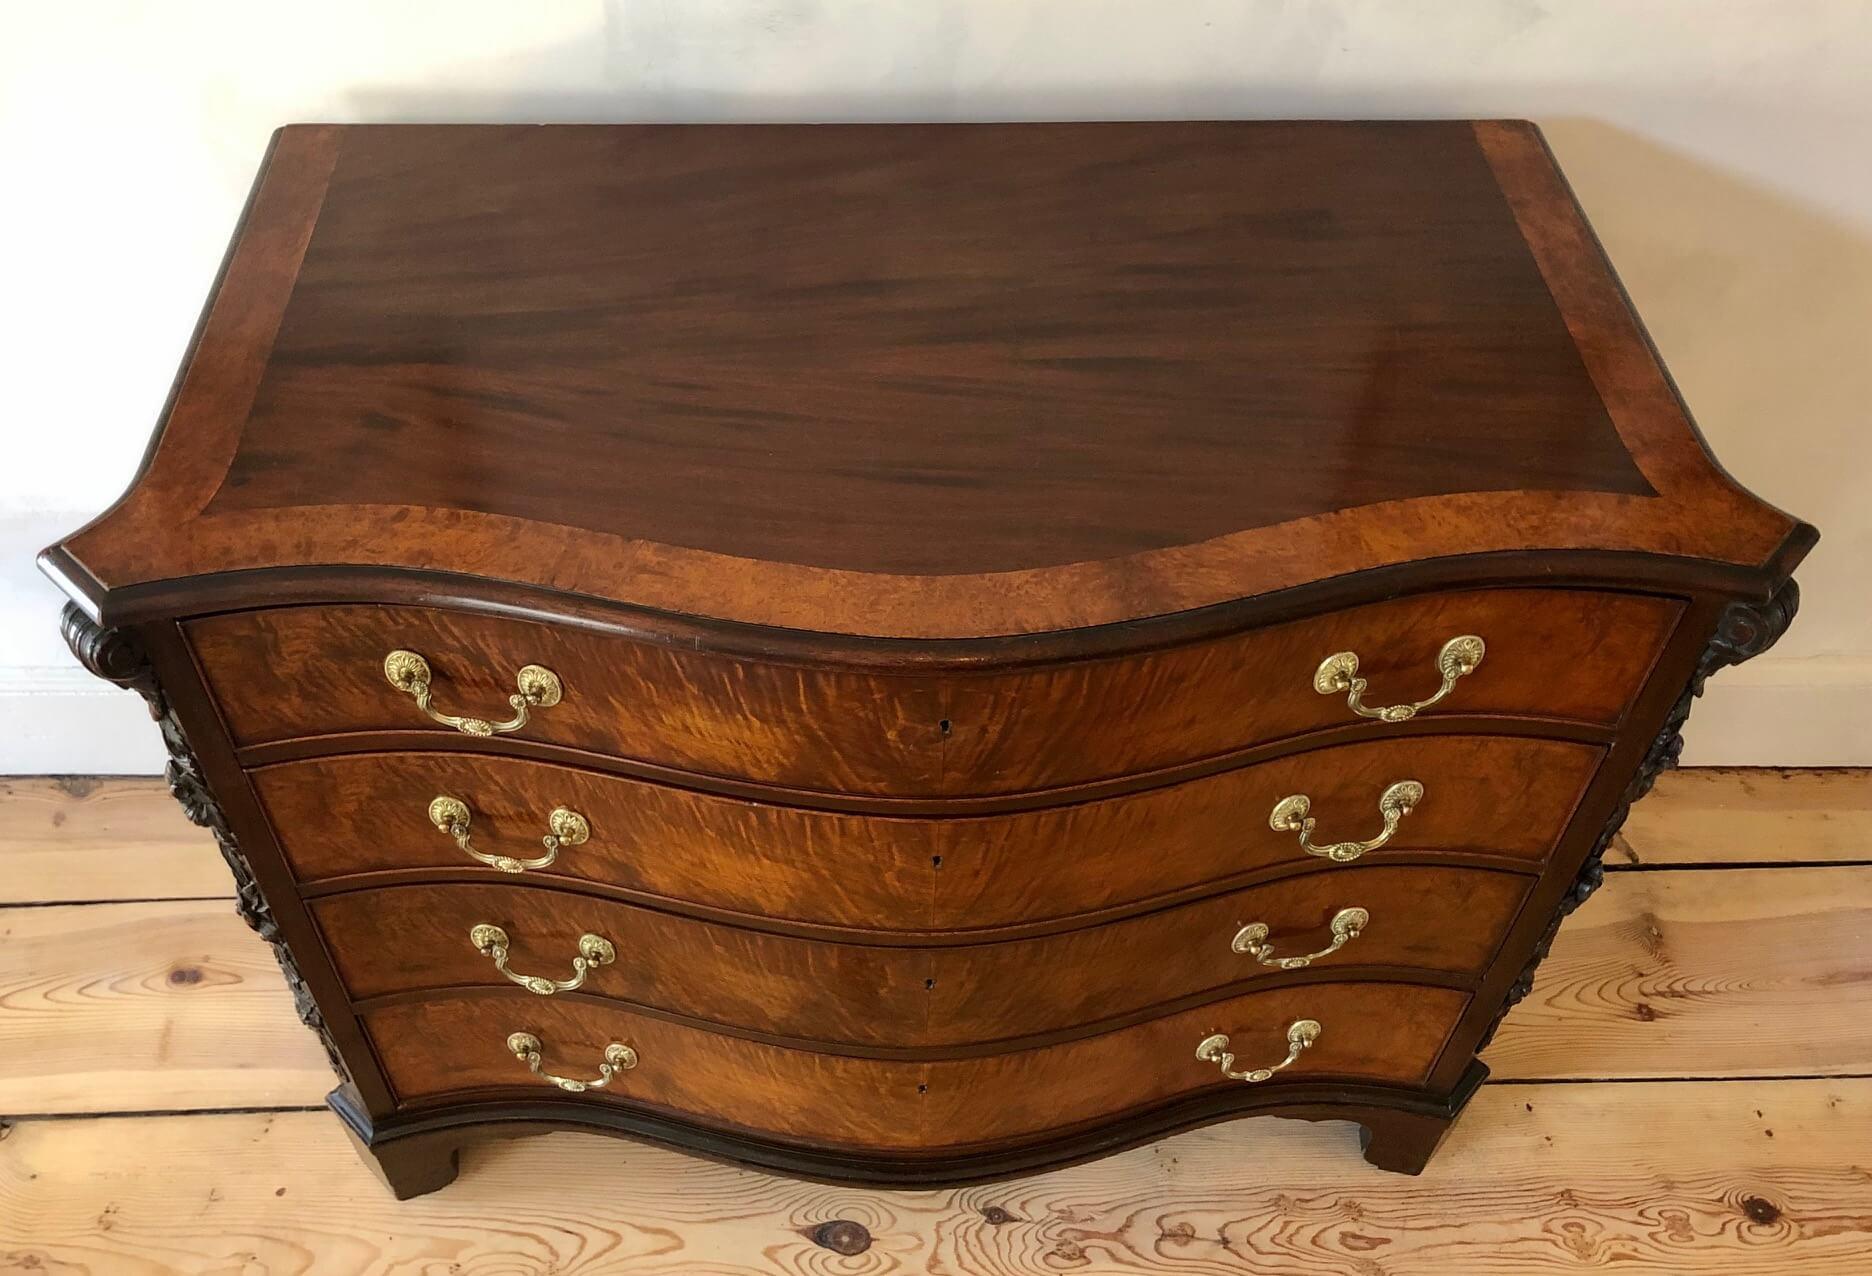 Fine and authentic English bench made solid mahogany serpentine front chest of four drawers after a design by Thomas Chippendale (1718-1779) of circa 1755; the top with burled amboyna border above canted corners with elaborate hand carved acanthus